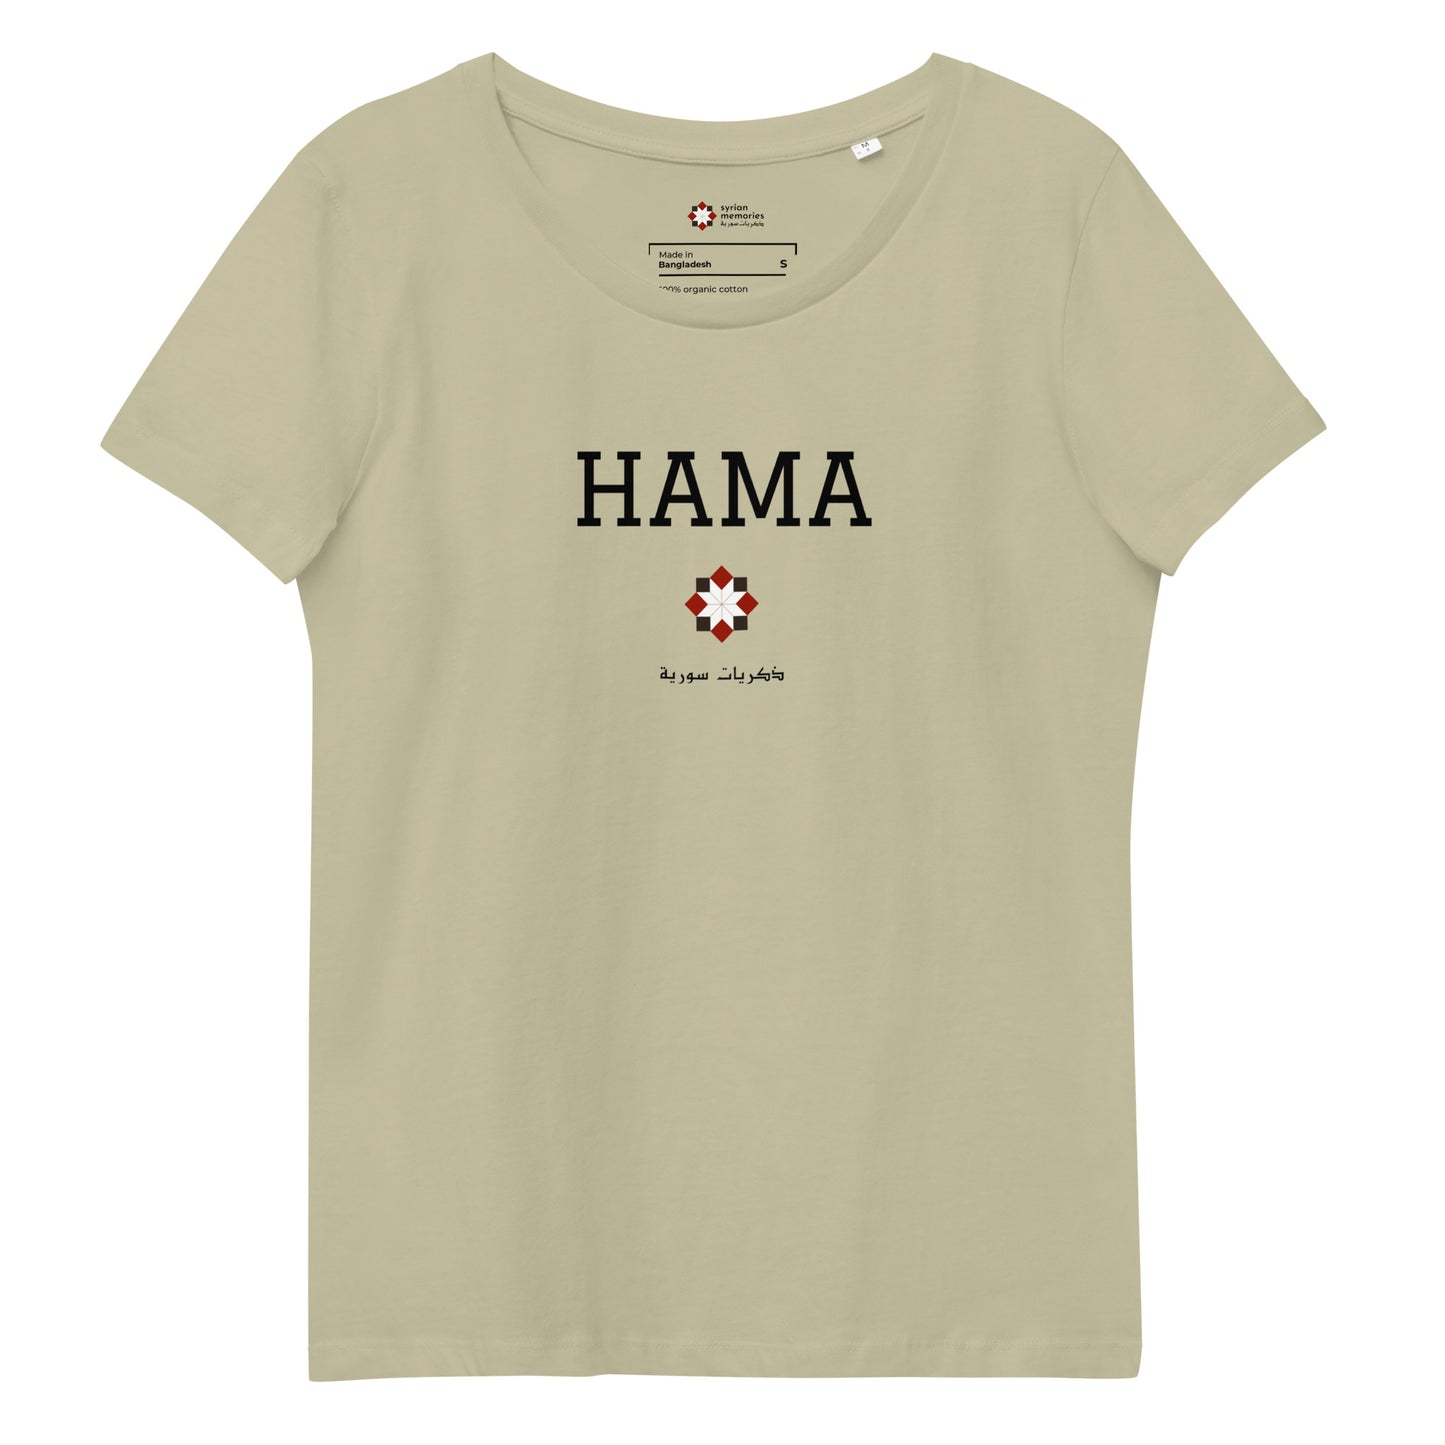 Hama - University Collection - Women's Fitted Eco Tee